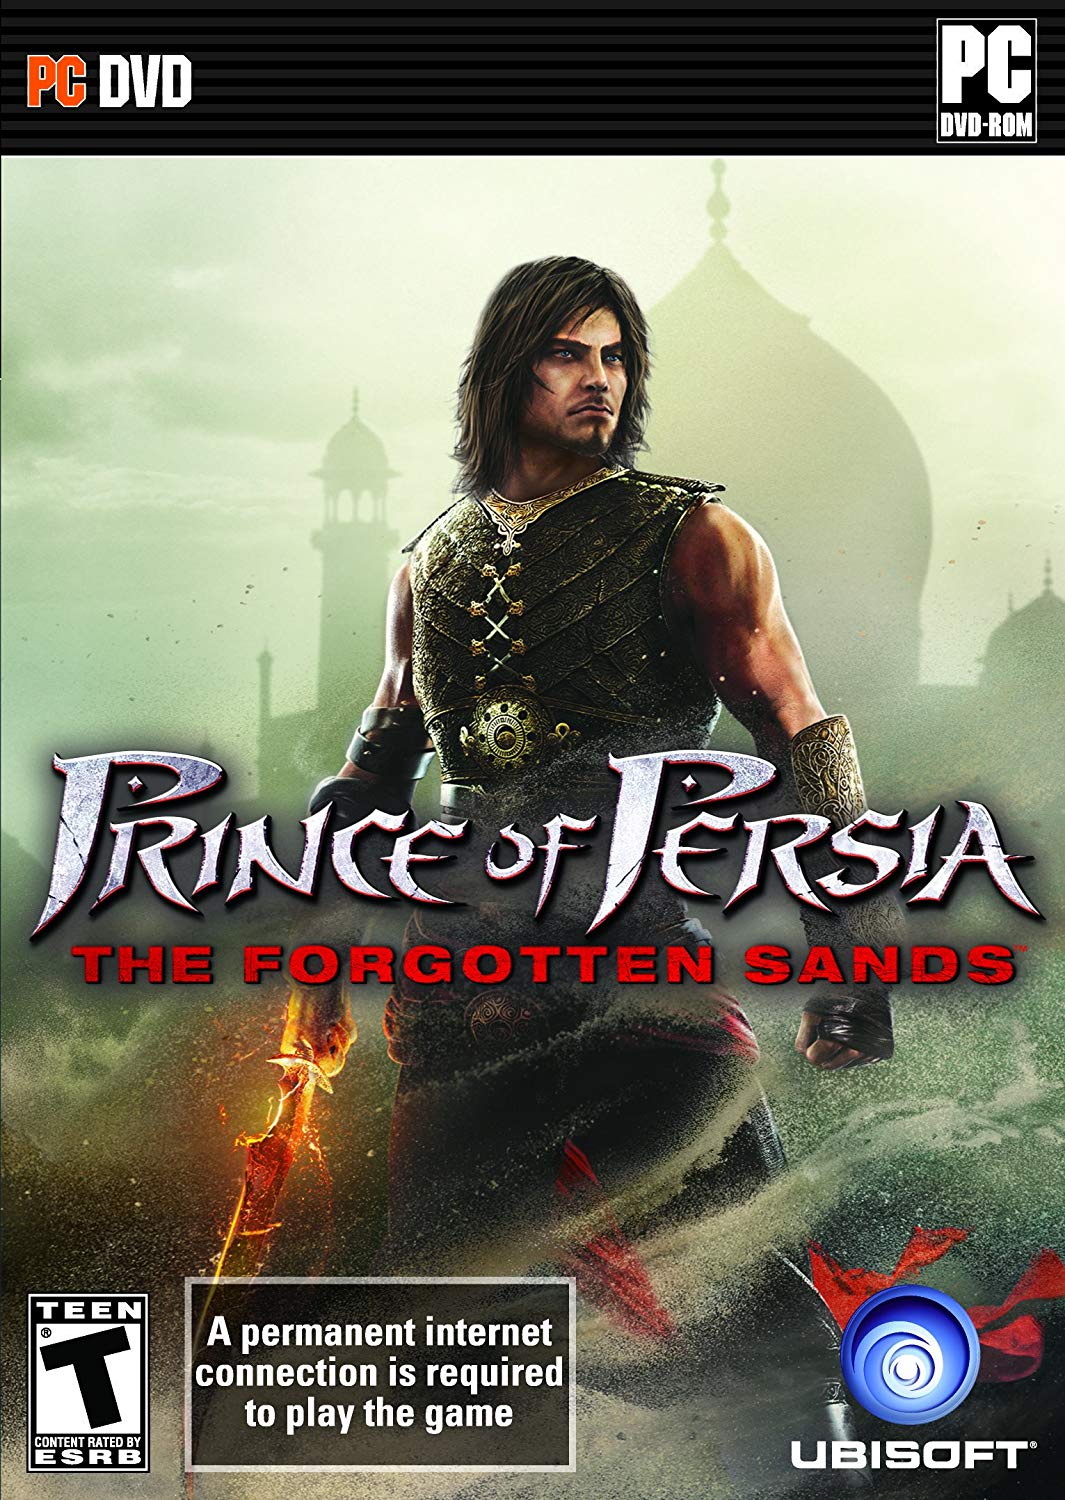 Prince of Persia: The Forgotten Sands: Video Games